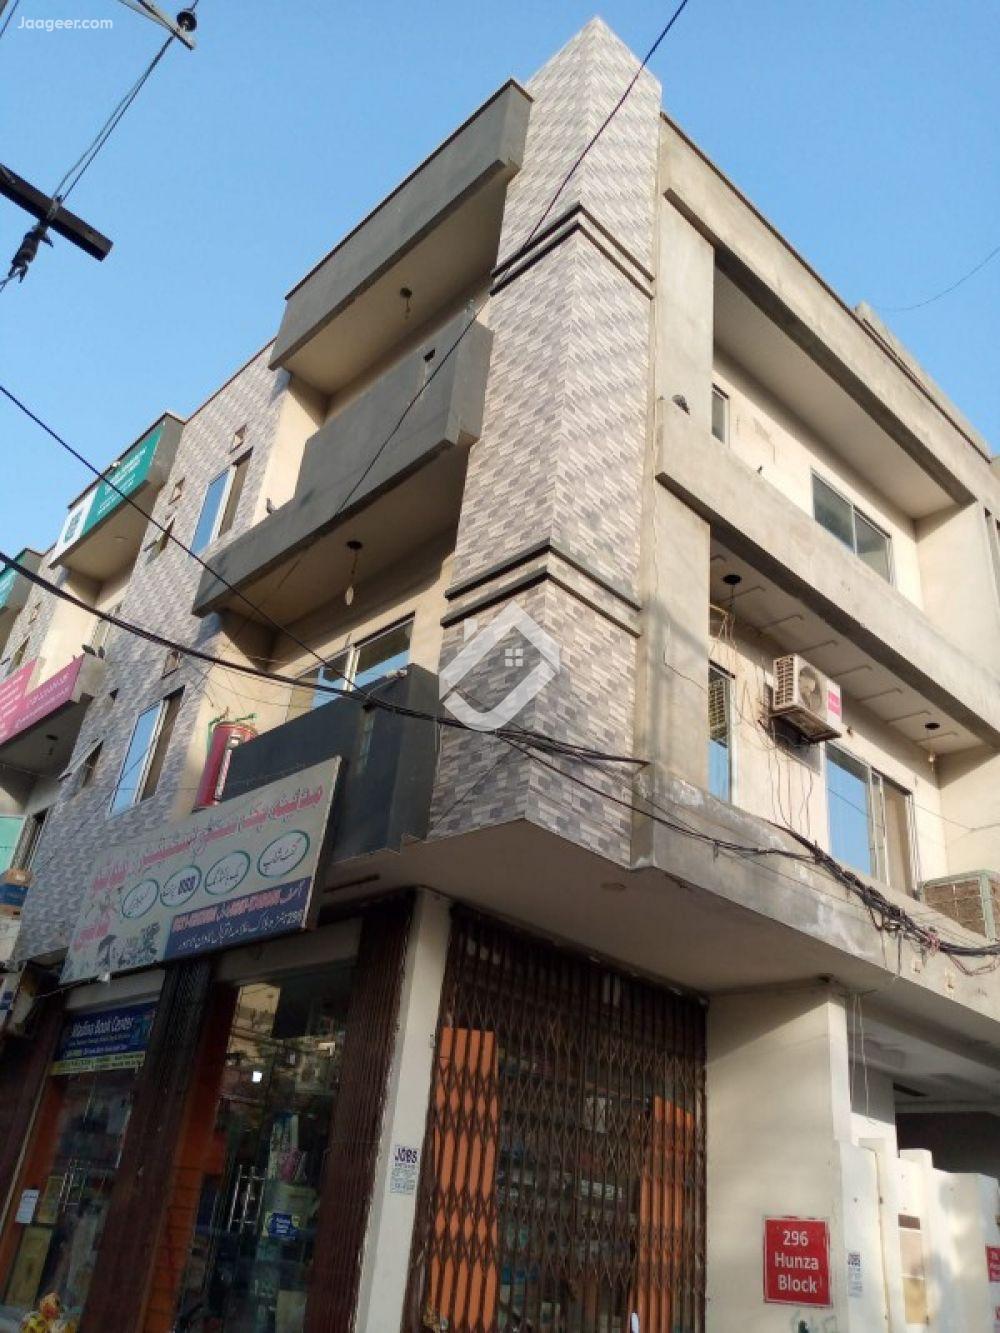 View  10 Malra Corner Plaza Is Available For Sale In Allama Iqbal Town in Allama Iqbal Town, Lahore